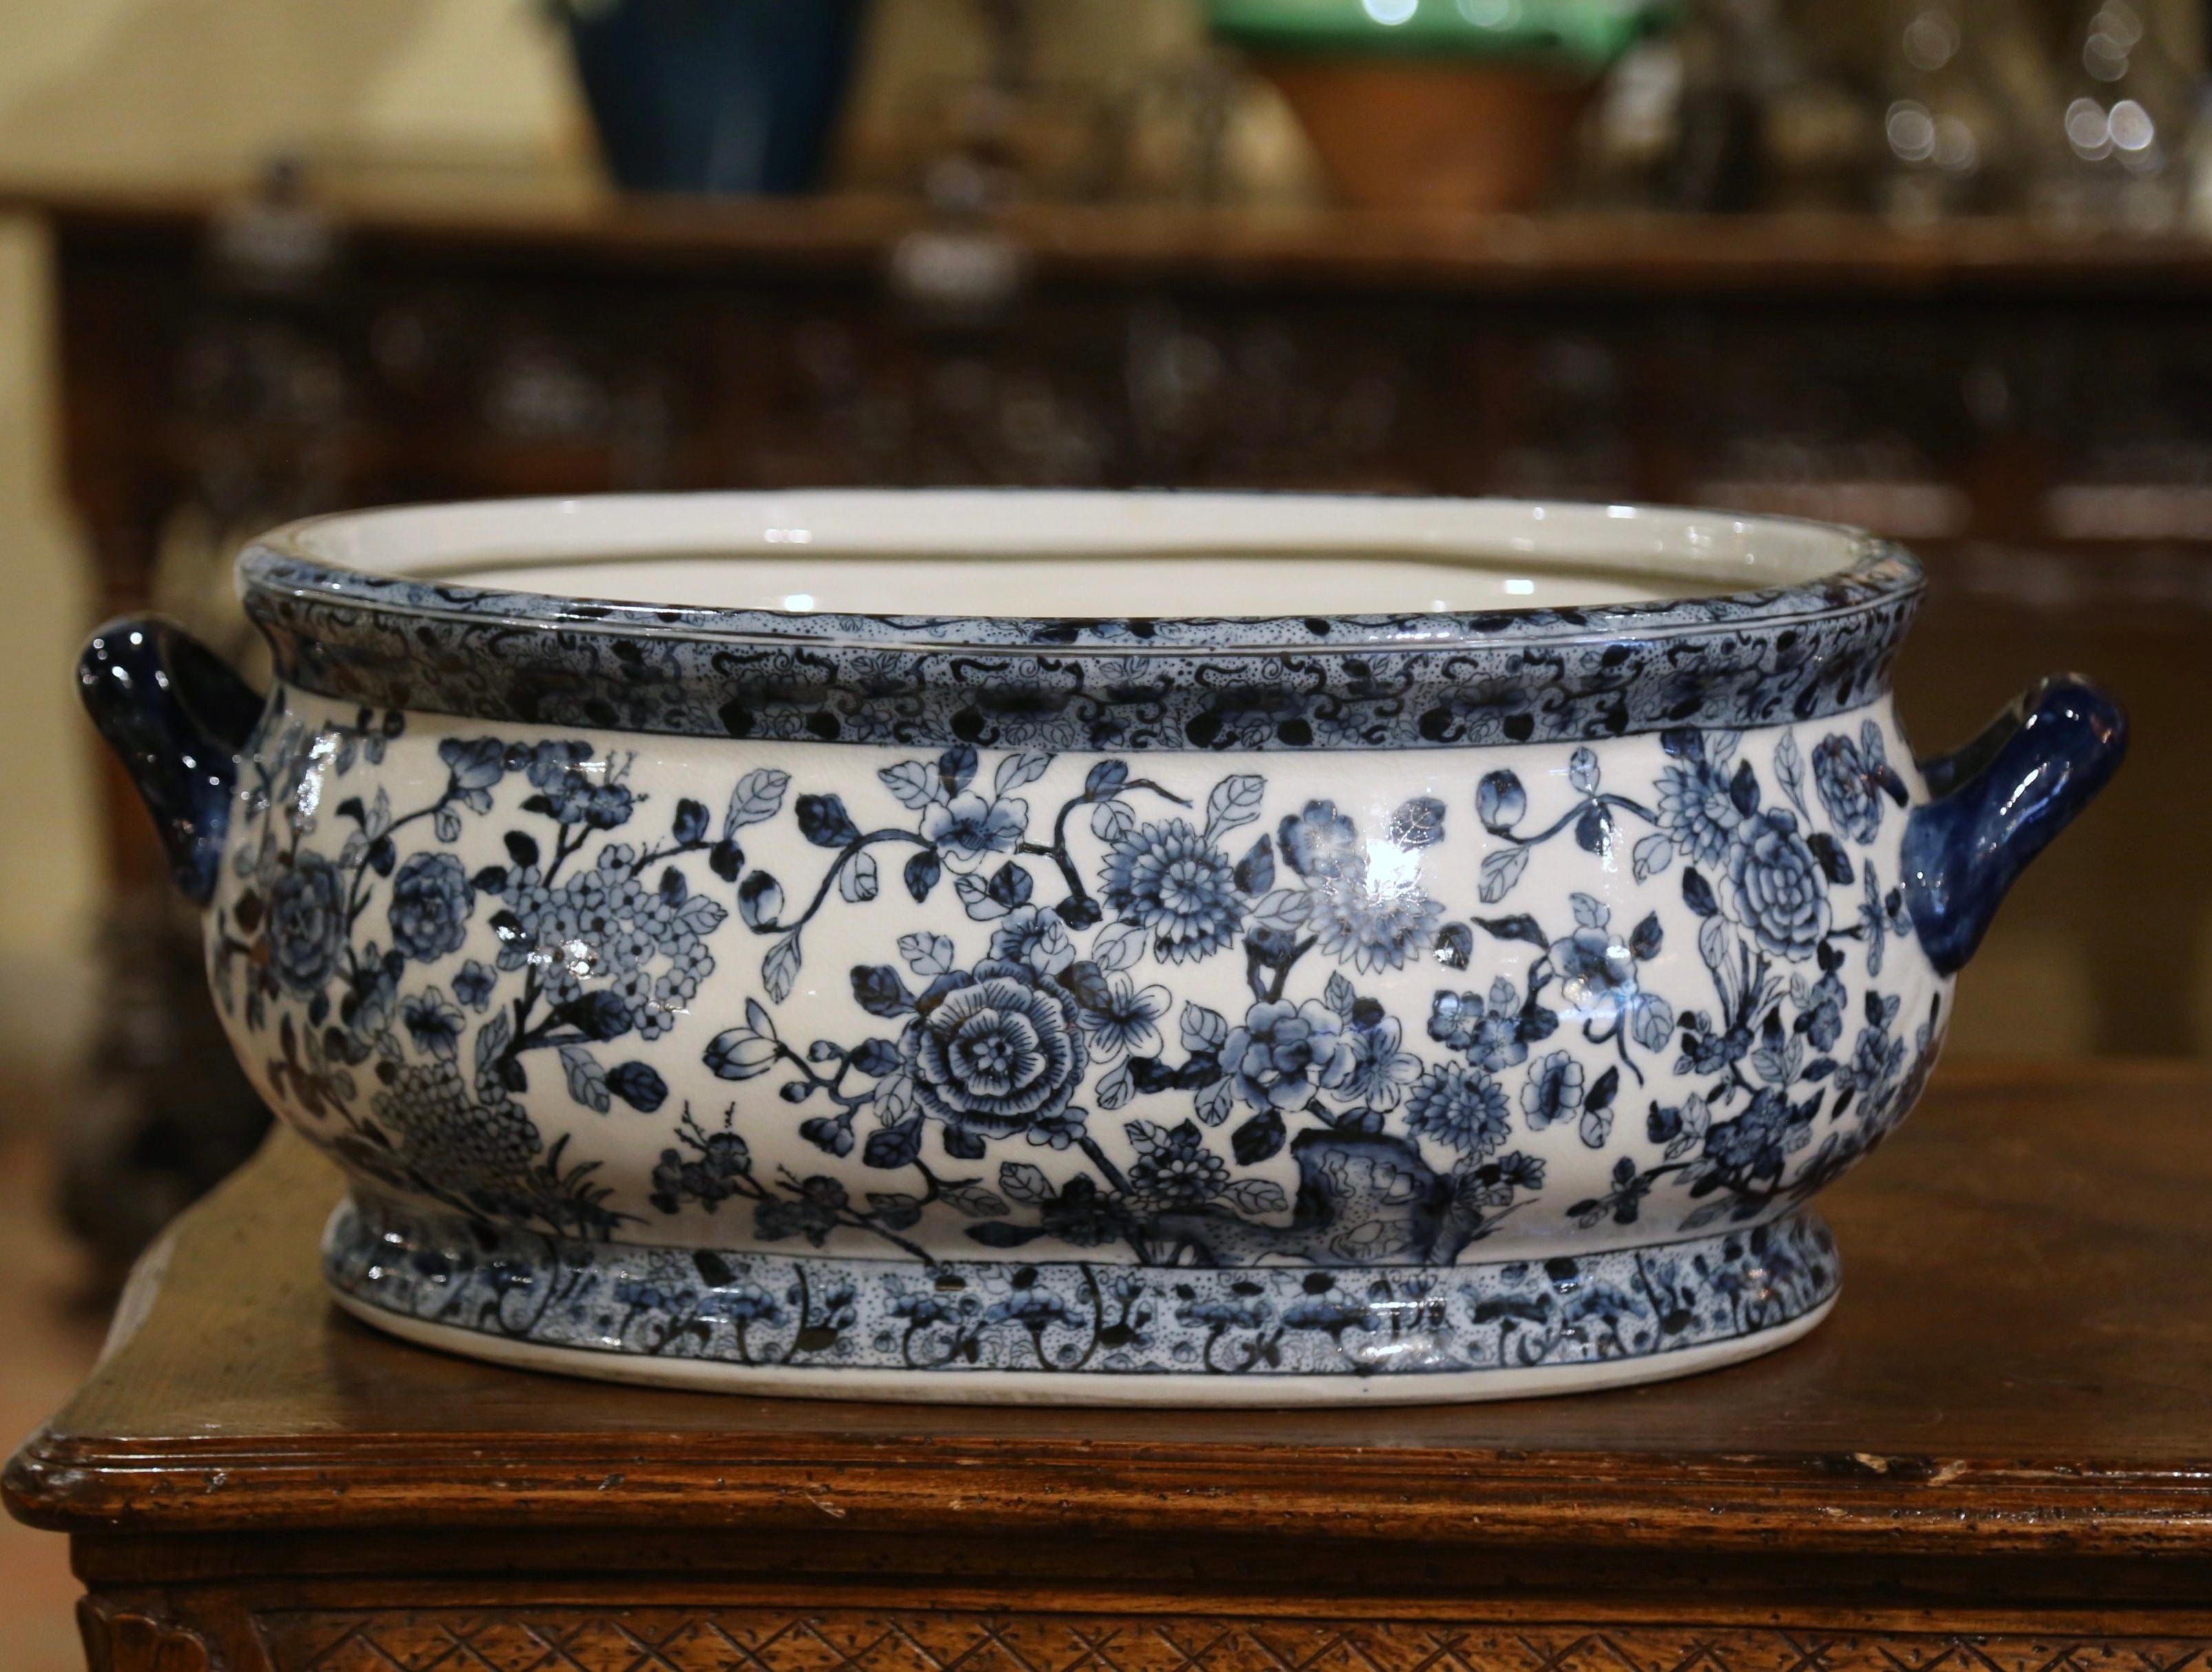 Crafted in China circa 1960 and oval in shape with bombe sides, the vintage porcelain basin is dressed with two side handles; it is decorated with hand painted floral motifs around the perimeter of the pot, the inside features painted fish and